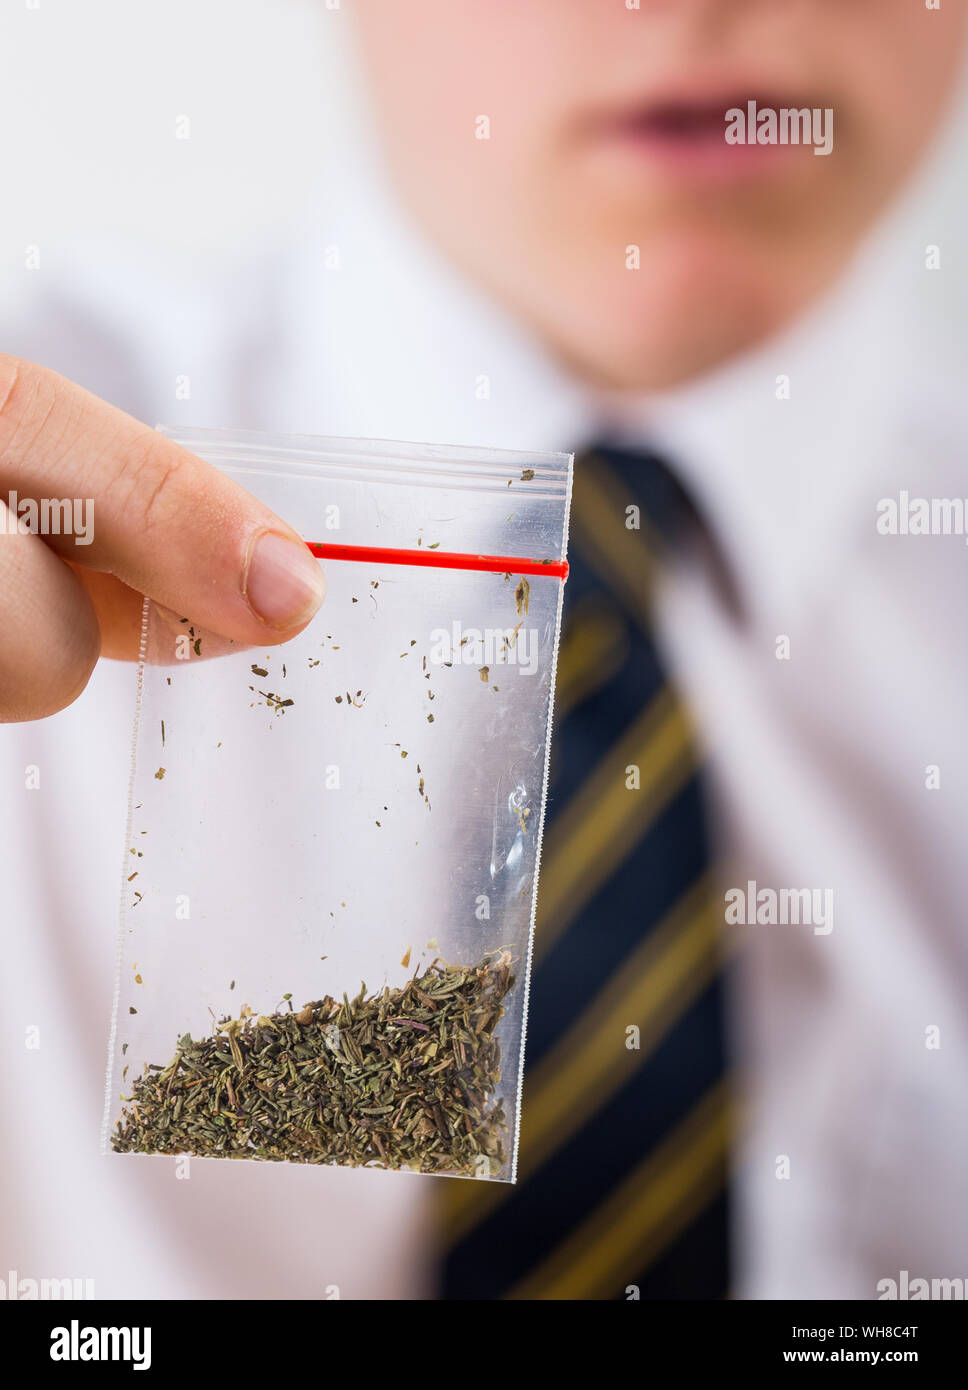 A school pupil holding a bag of drugs weed or spice (posed photo) Stock Photo